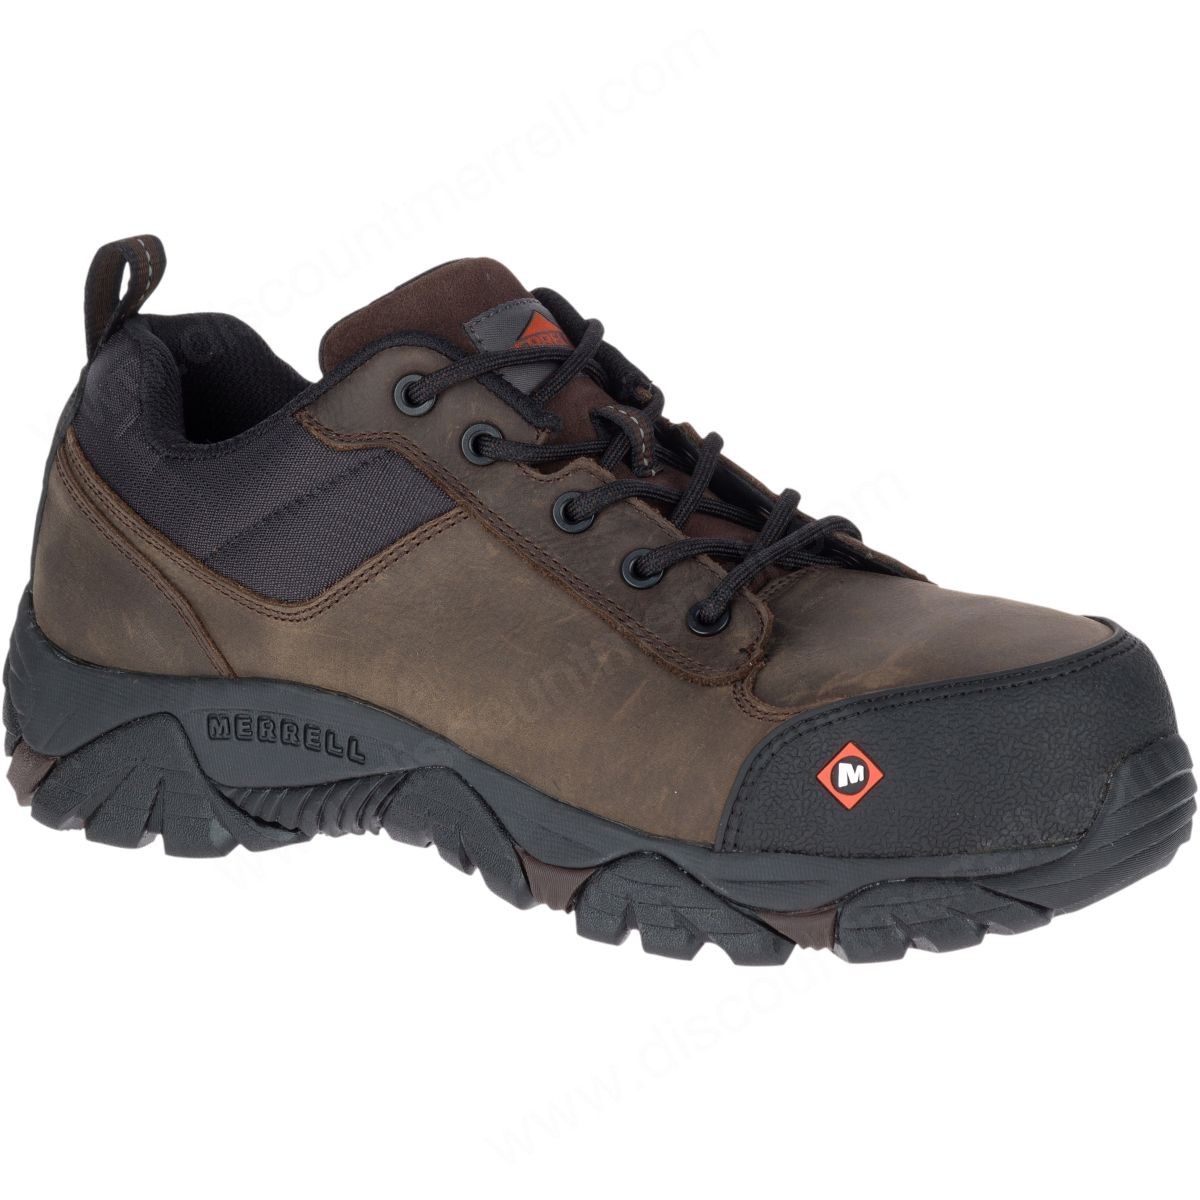 Merrell Man's Moab Rover Lace Comp Toe Work Shoe Espresso - Merrell Man's Moab Rover Lace Comp Toe Work Shoe Espresso